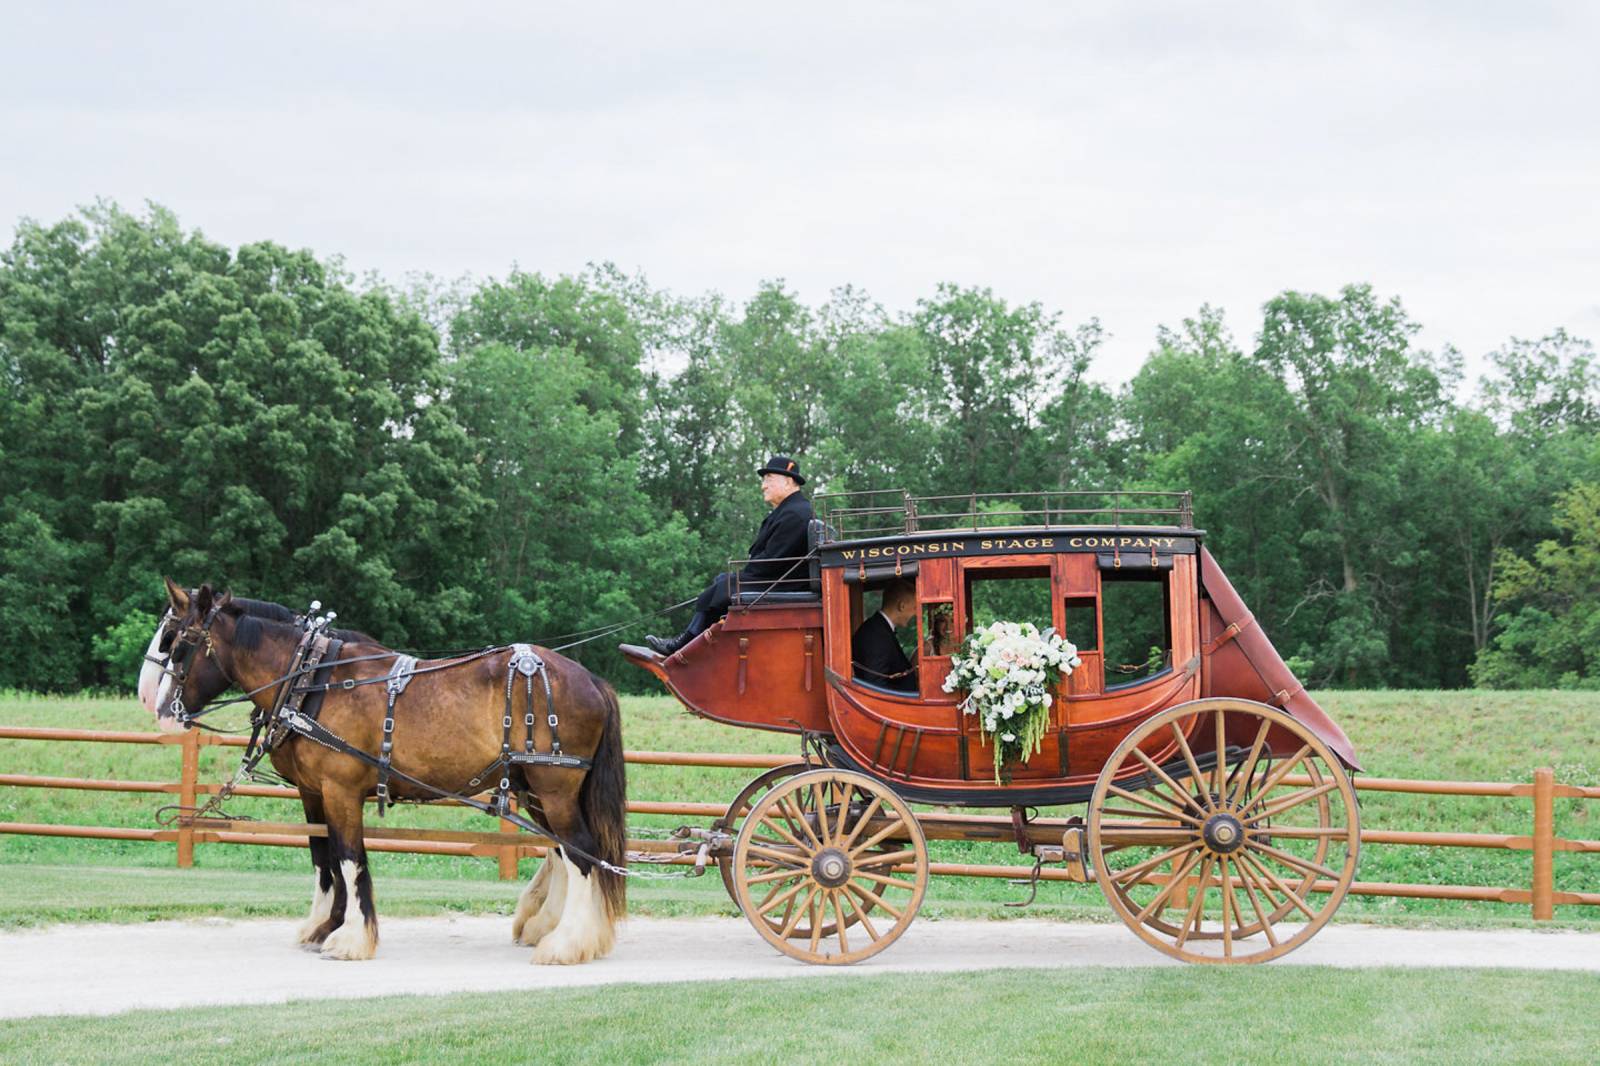 Bridal Carriage